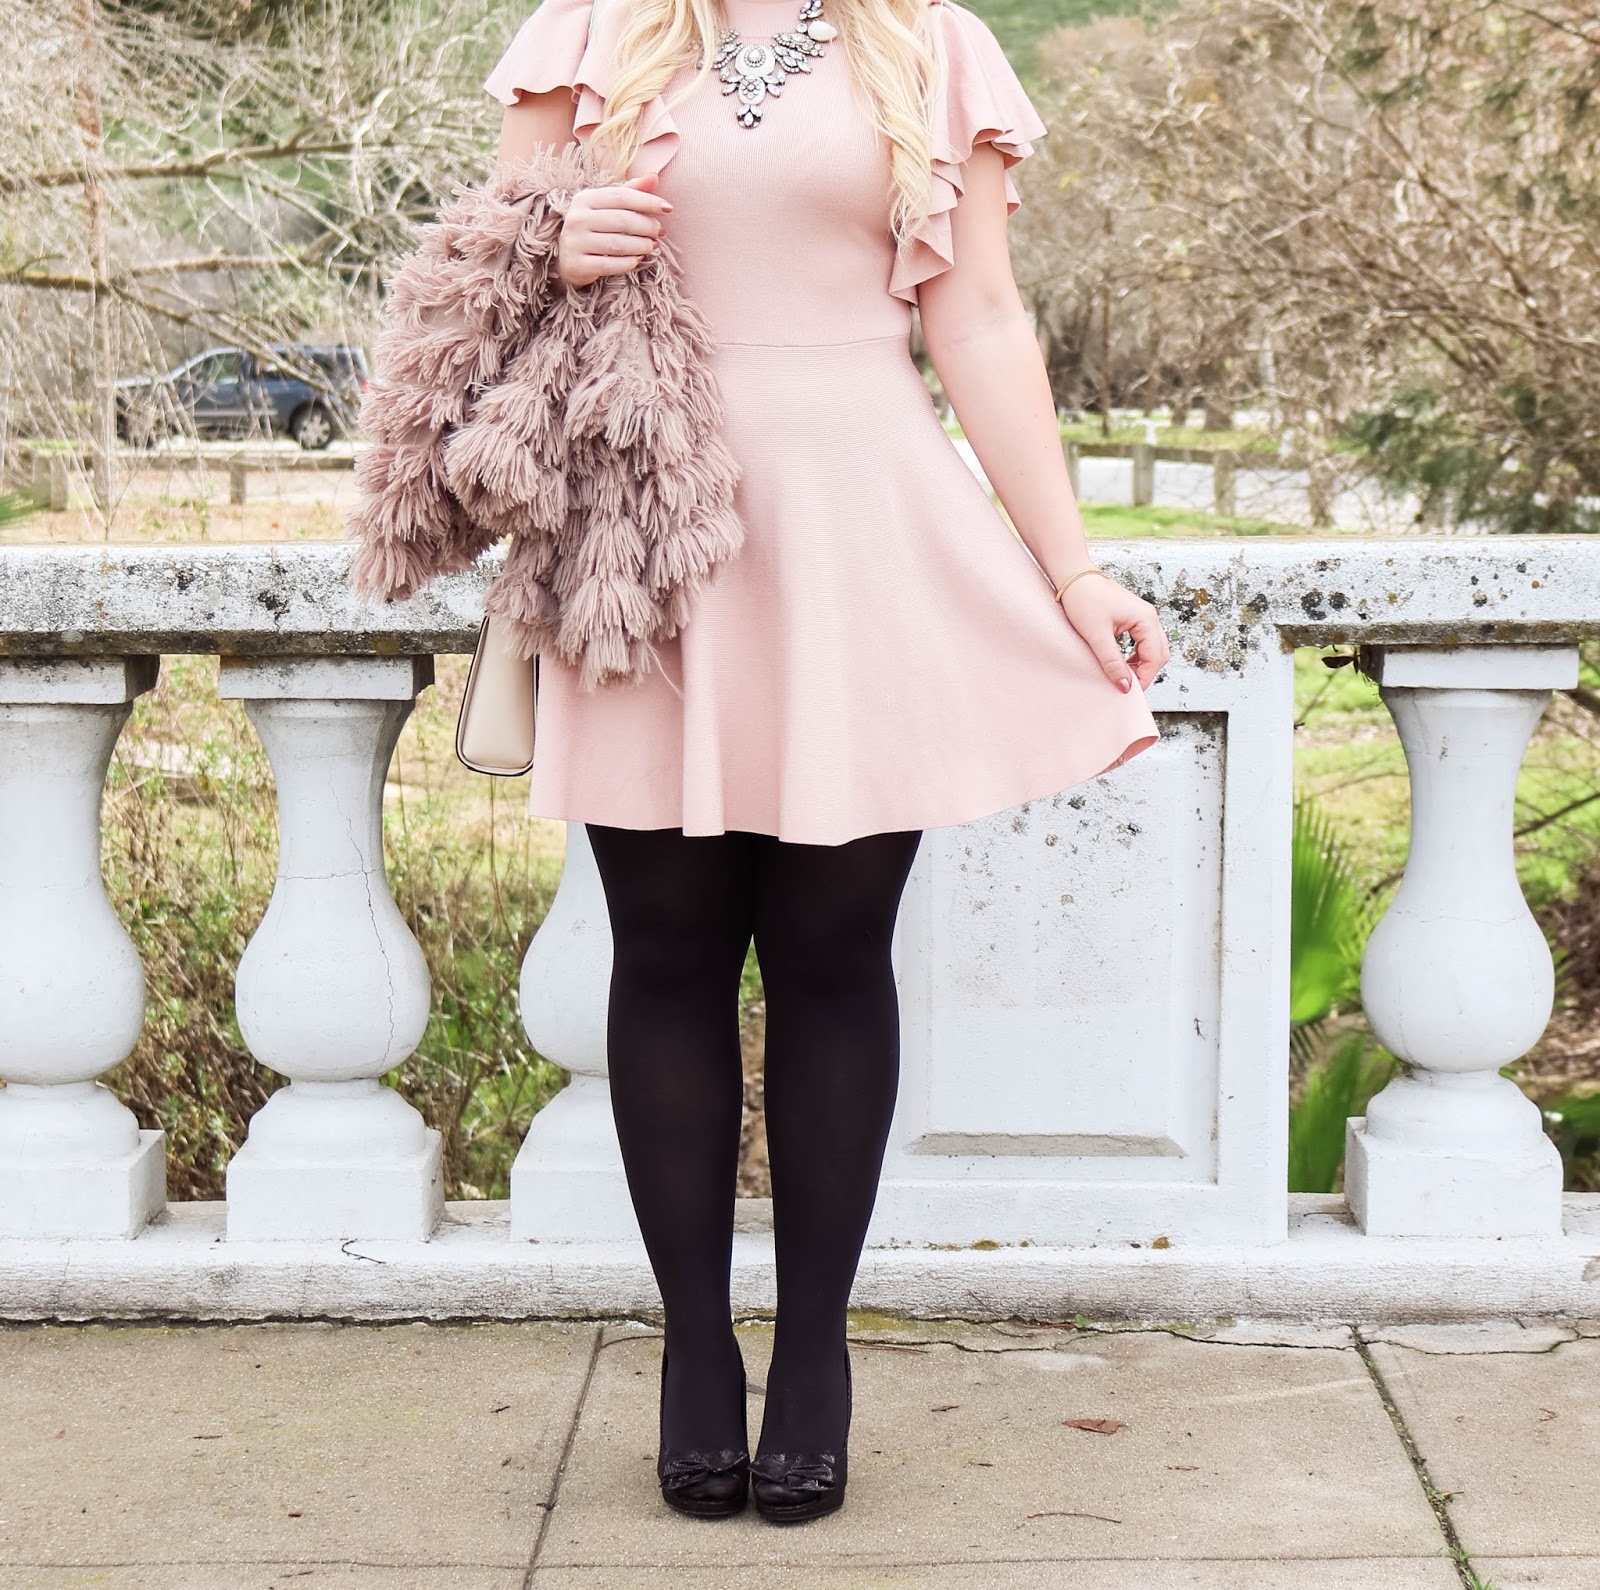 Feminine fashion blogger Lizzie in Lace shares a Pink and Black Outfit for Valentine's Day